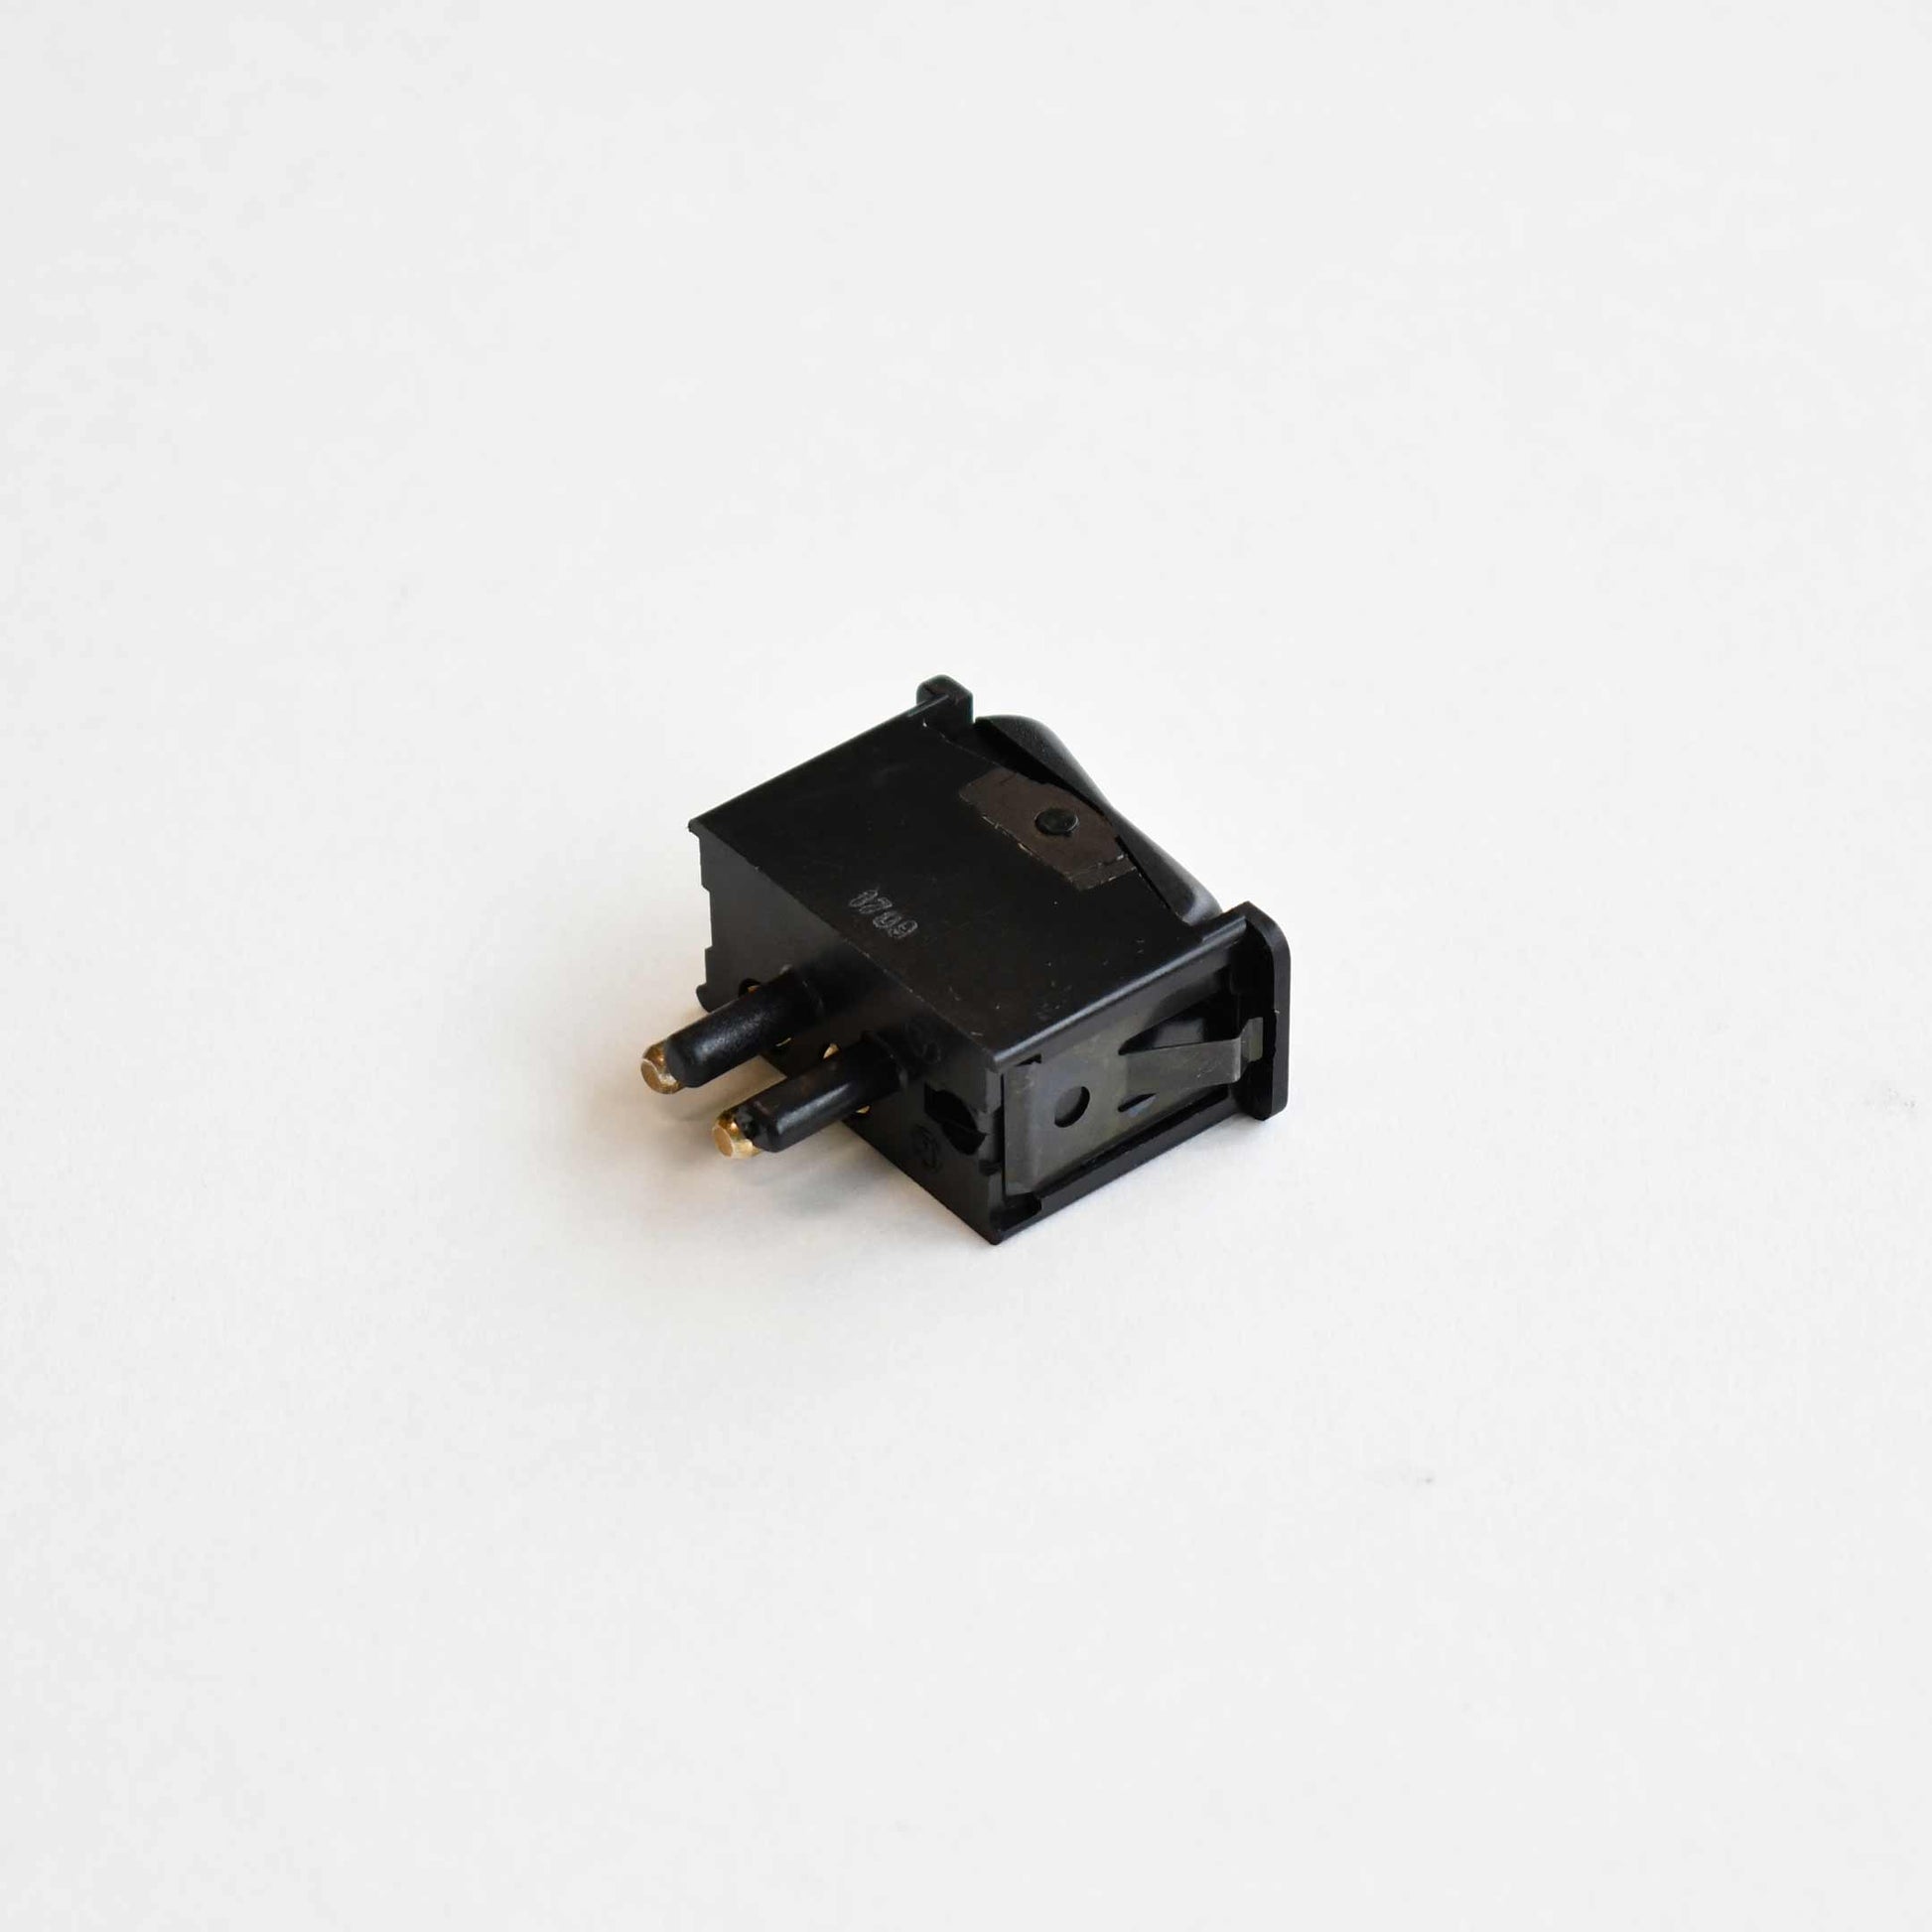 Classic Trim Parts - Dome Light Switch (1971-1982) Genuine Mercedes - R107 and C107 Models - Mercedes-Benz